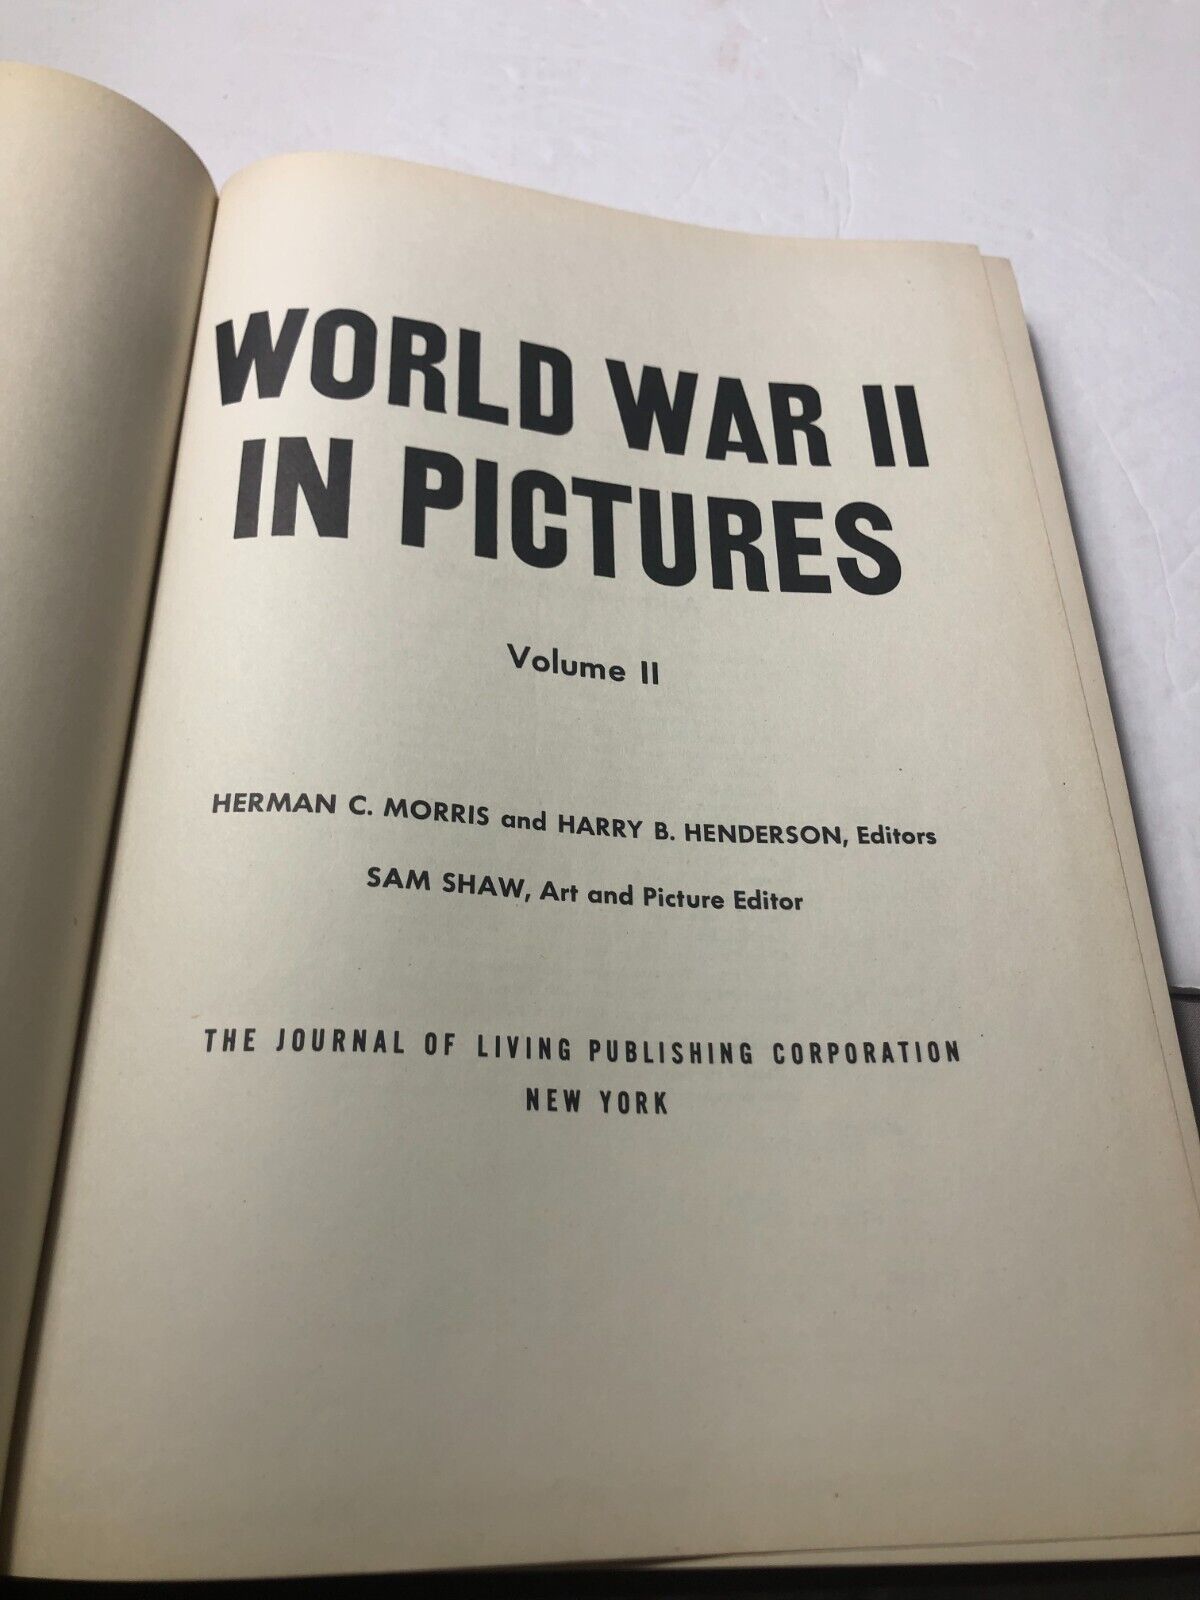 World War II in Pictures, 1945 Book